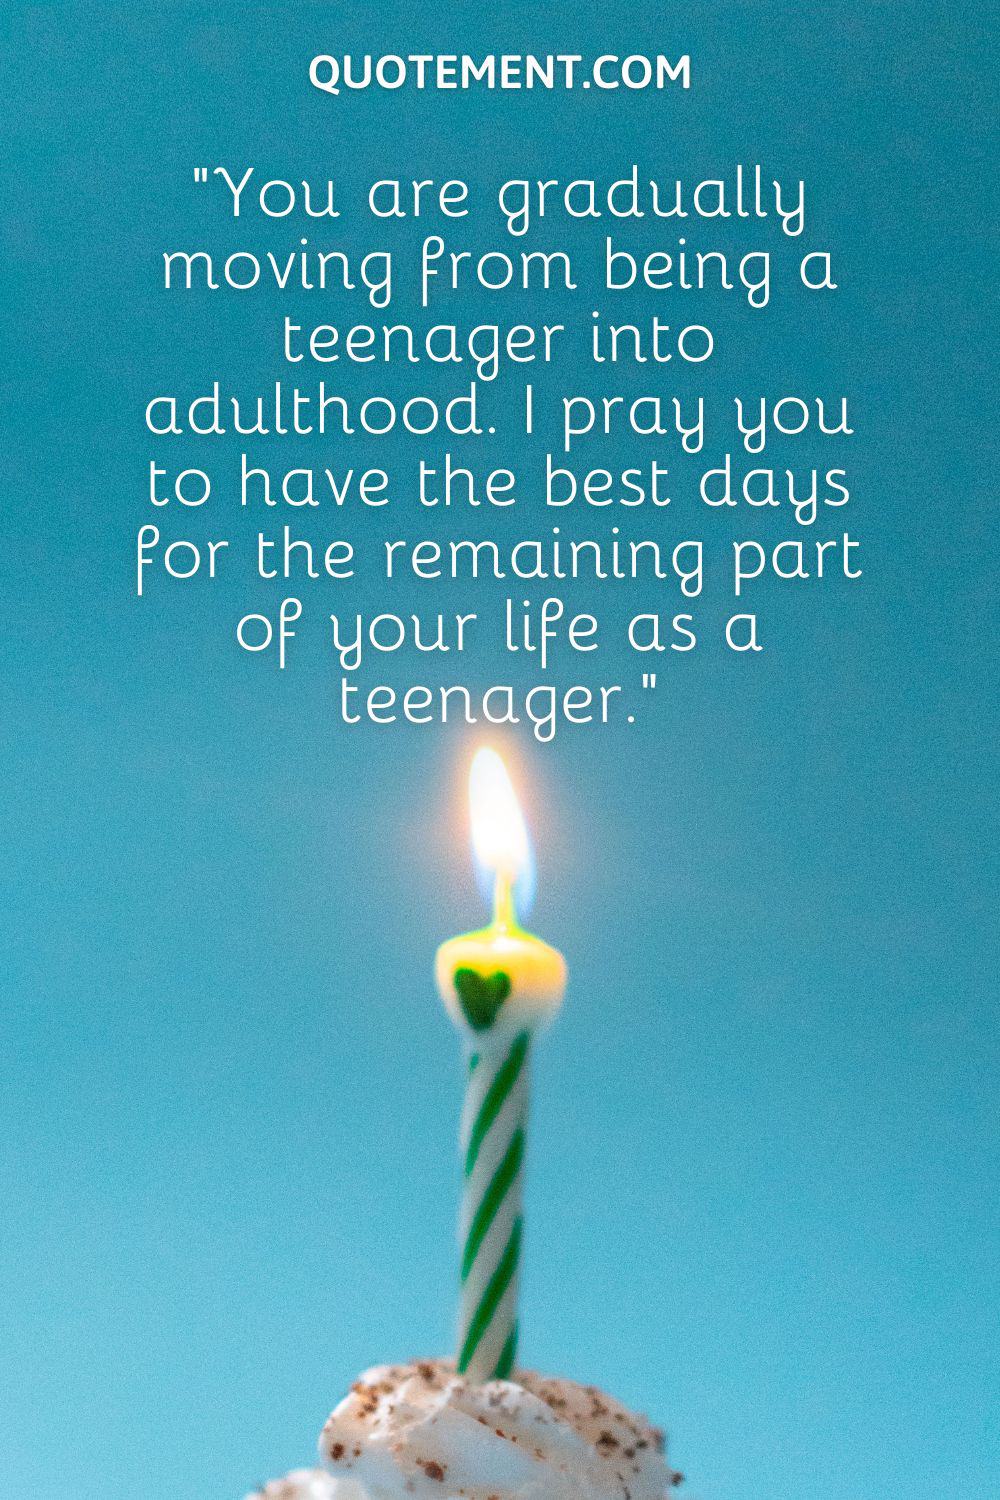 “You are gradually moving from being a teenager into adulthood. I pray you to have the best days for the remaining part of your life as a teenager.”